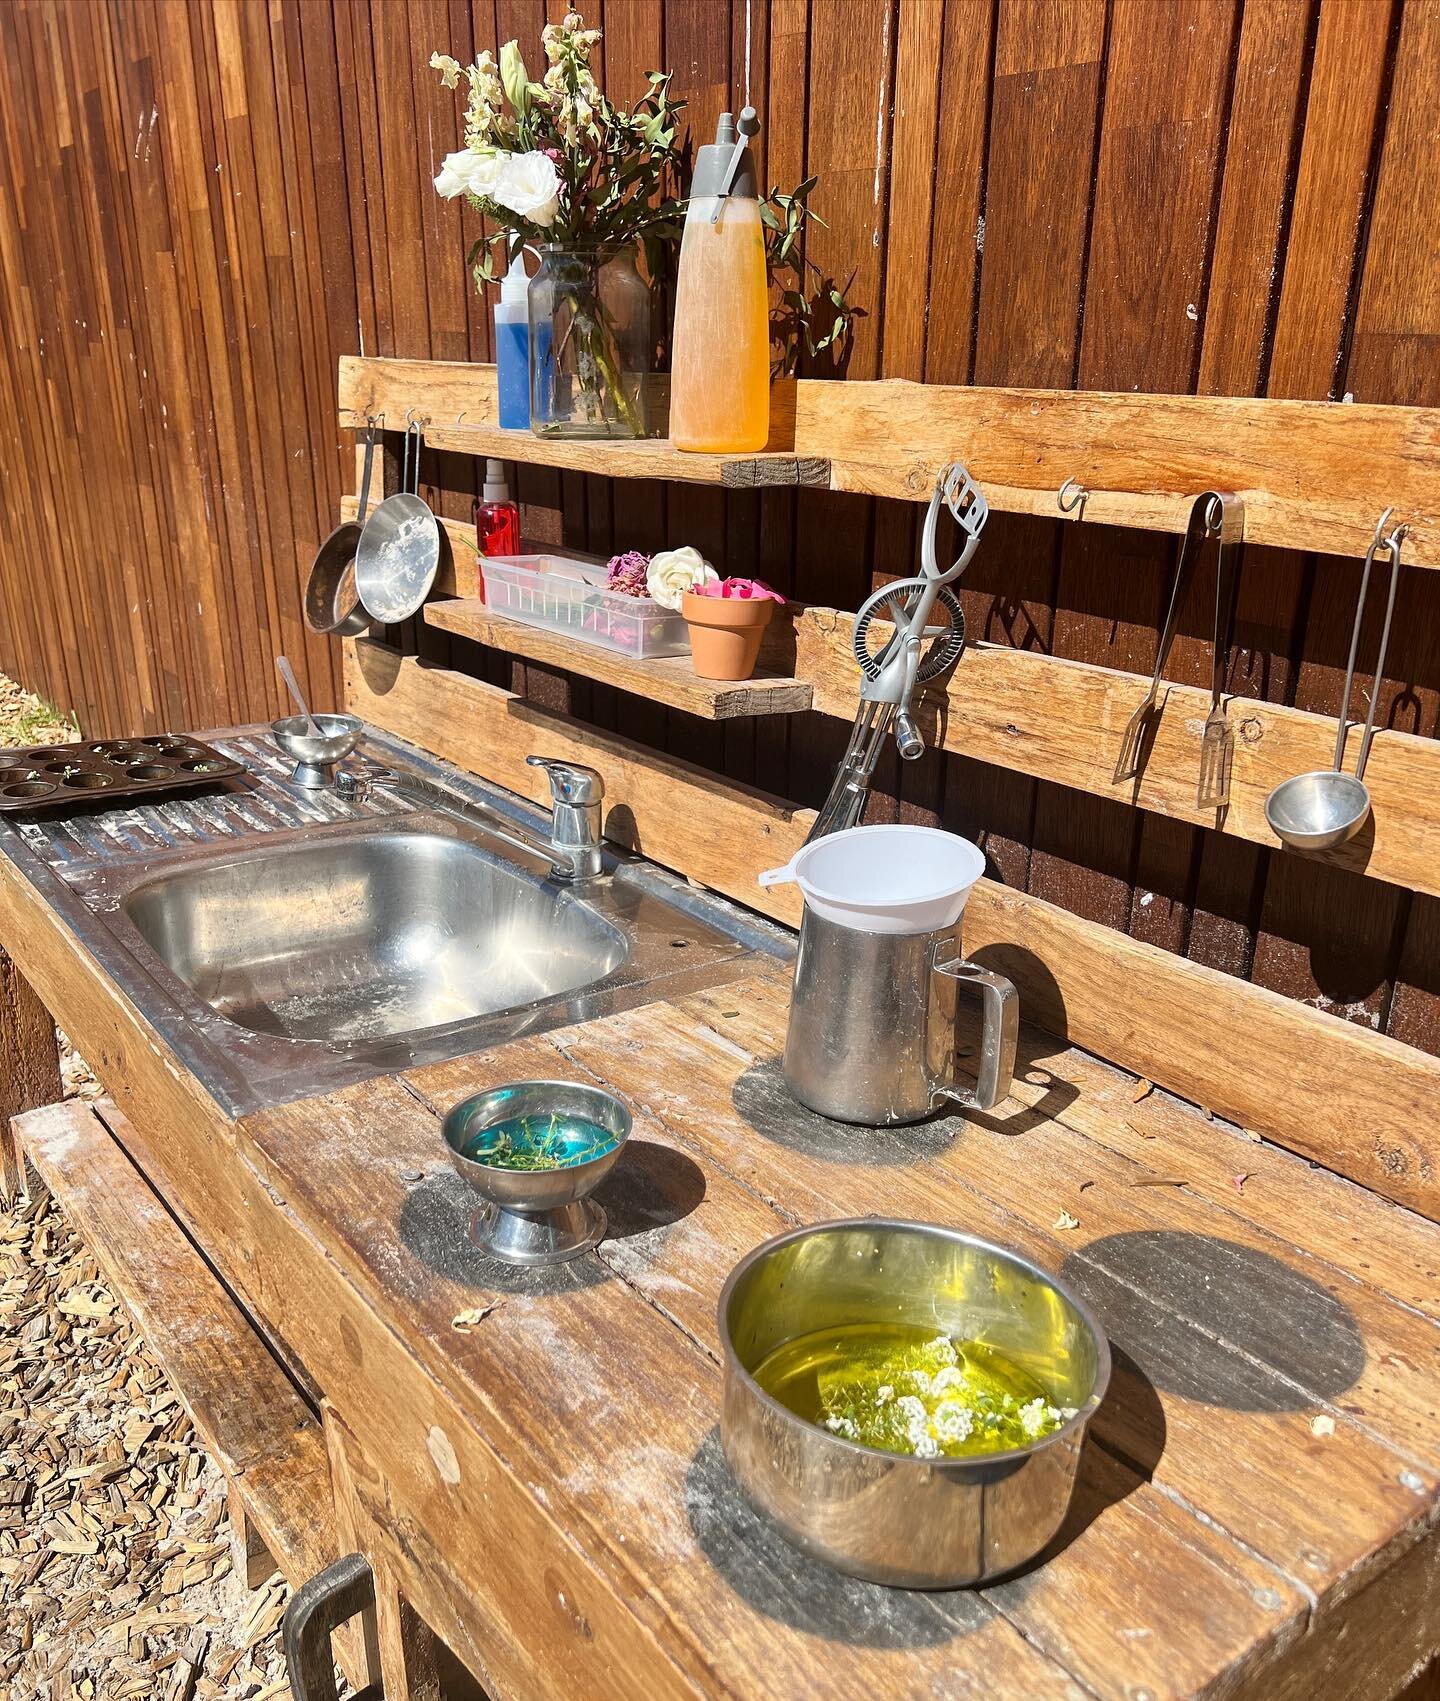 Bright and sunny days call for exploring our mud kitchen!☀️

&bull;
&bull;
&bull;
&bull;
#OBMC #OBriensMontessoriCentre #FollowTheirLead #HomeAwayFromHome  #Learning #EducatingChildren #Montessori #MontessoriEducation #EarlyChildhood #EarlyChildhoodE